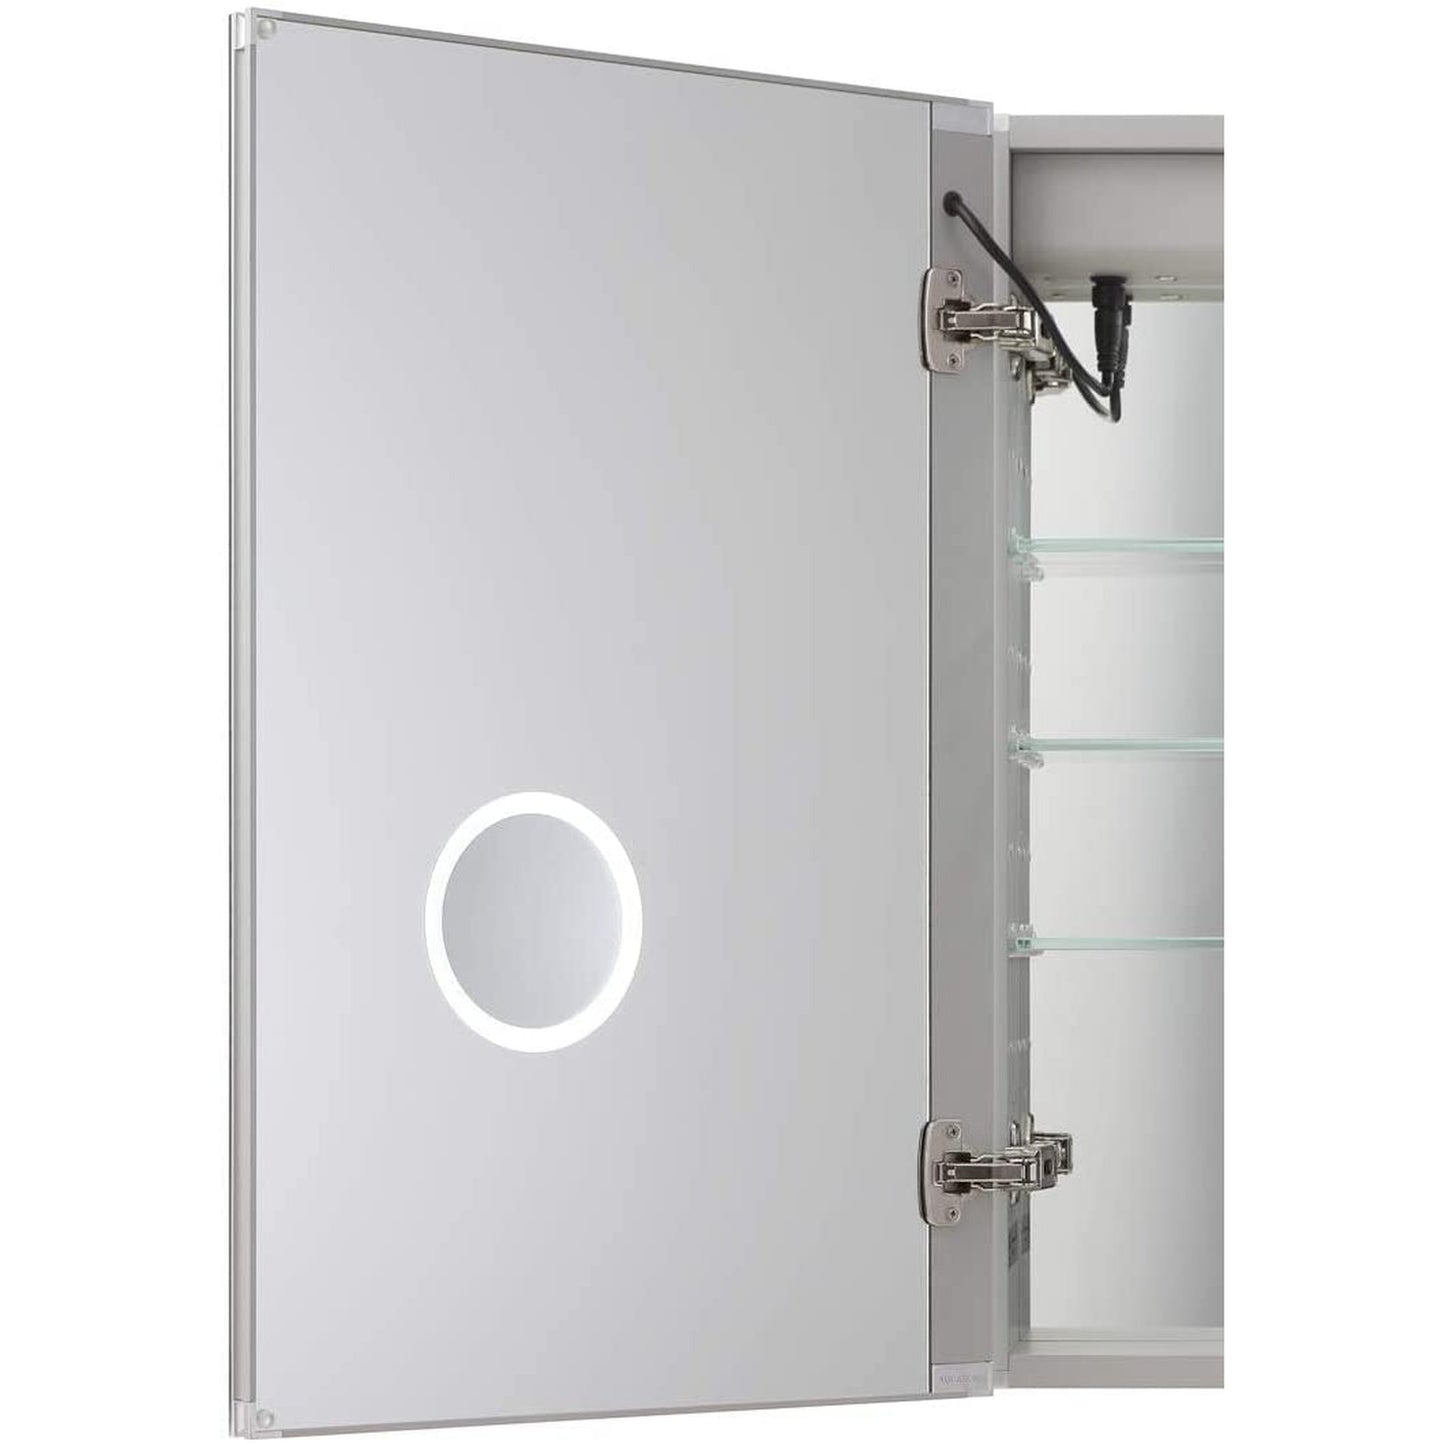 Aquadom Signature Royale Tri-View 40" x 30" Rectangular Medicine Cabinet With Lighting, Defogger, Integrated LED 3X Magnifying Mirror And Electrical Outlet with USB